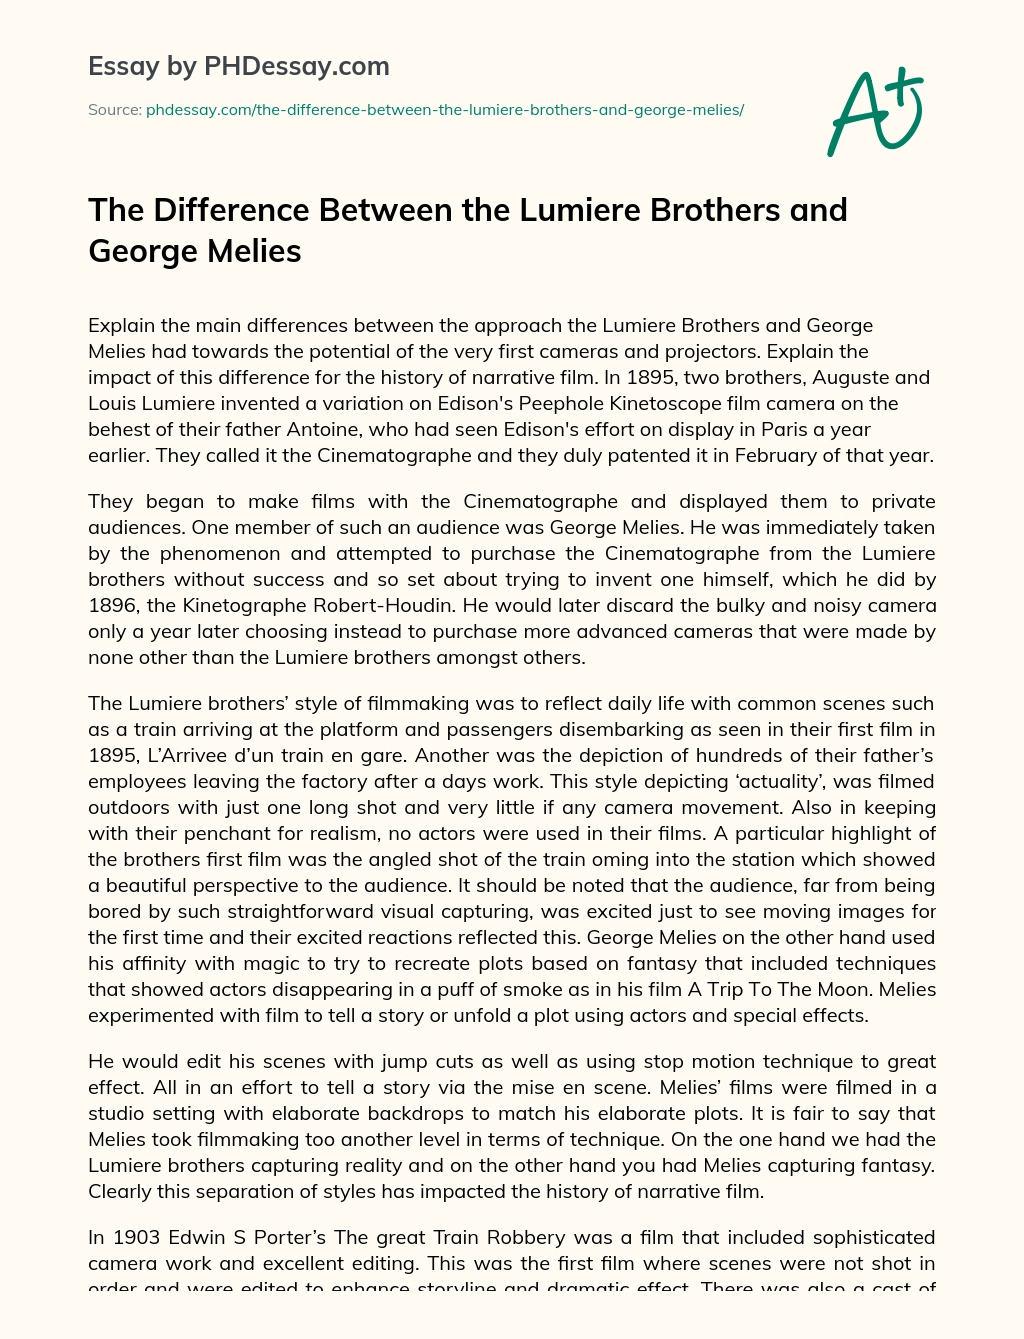 The Difference Between the Lumiere Brothers and George Melies essay